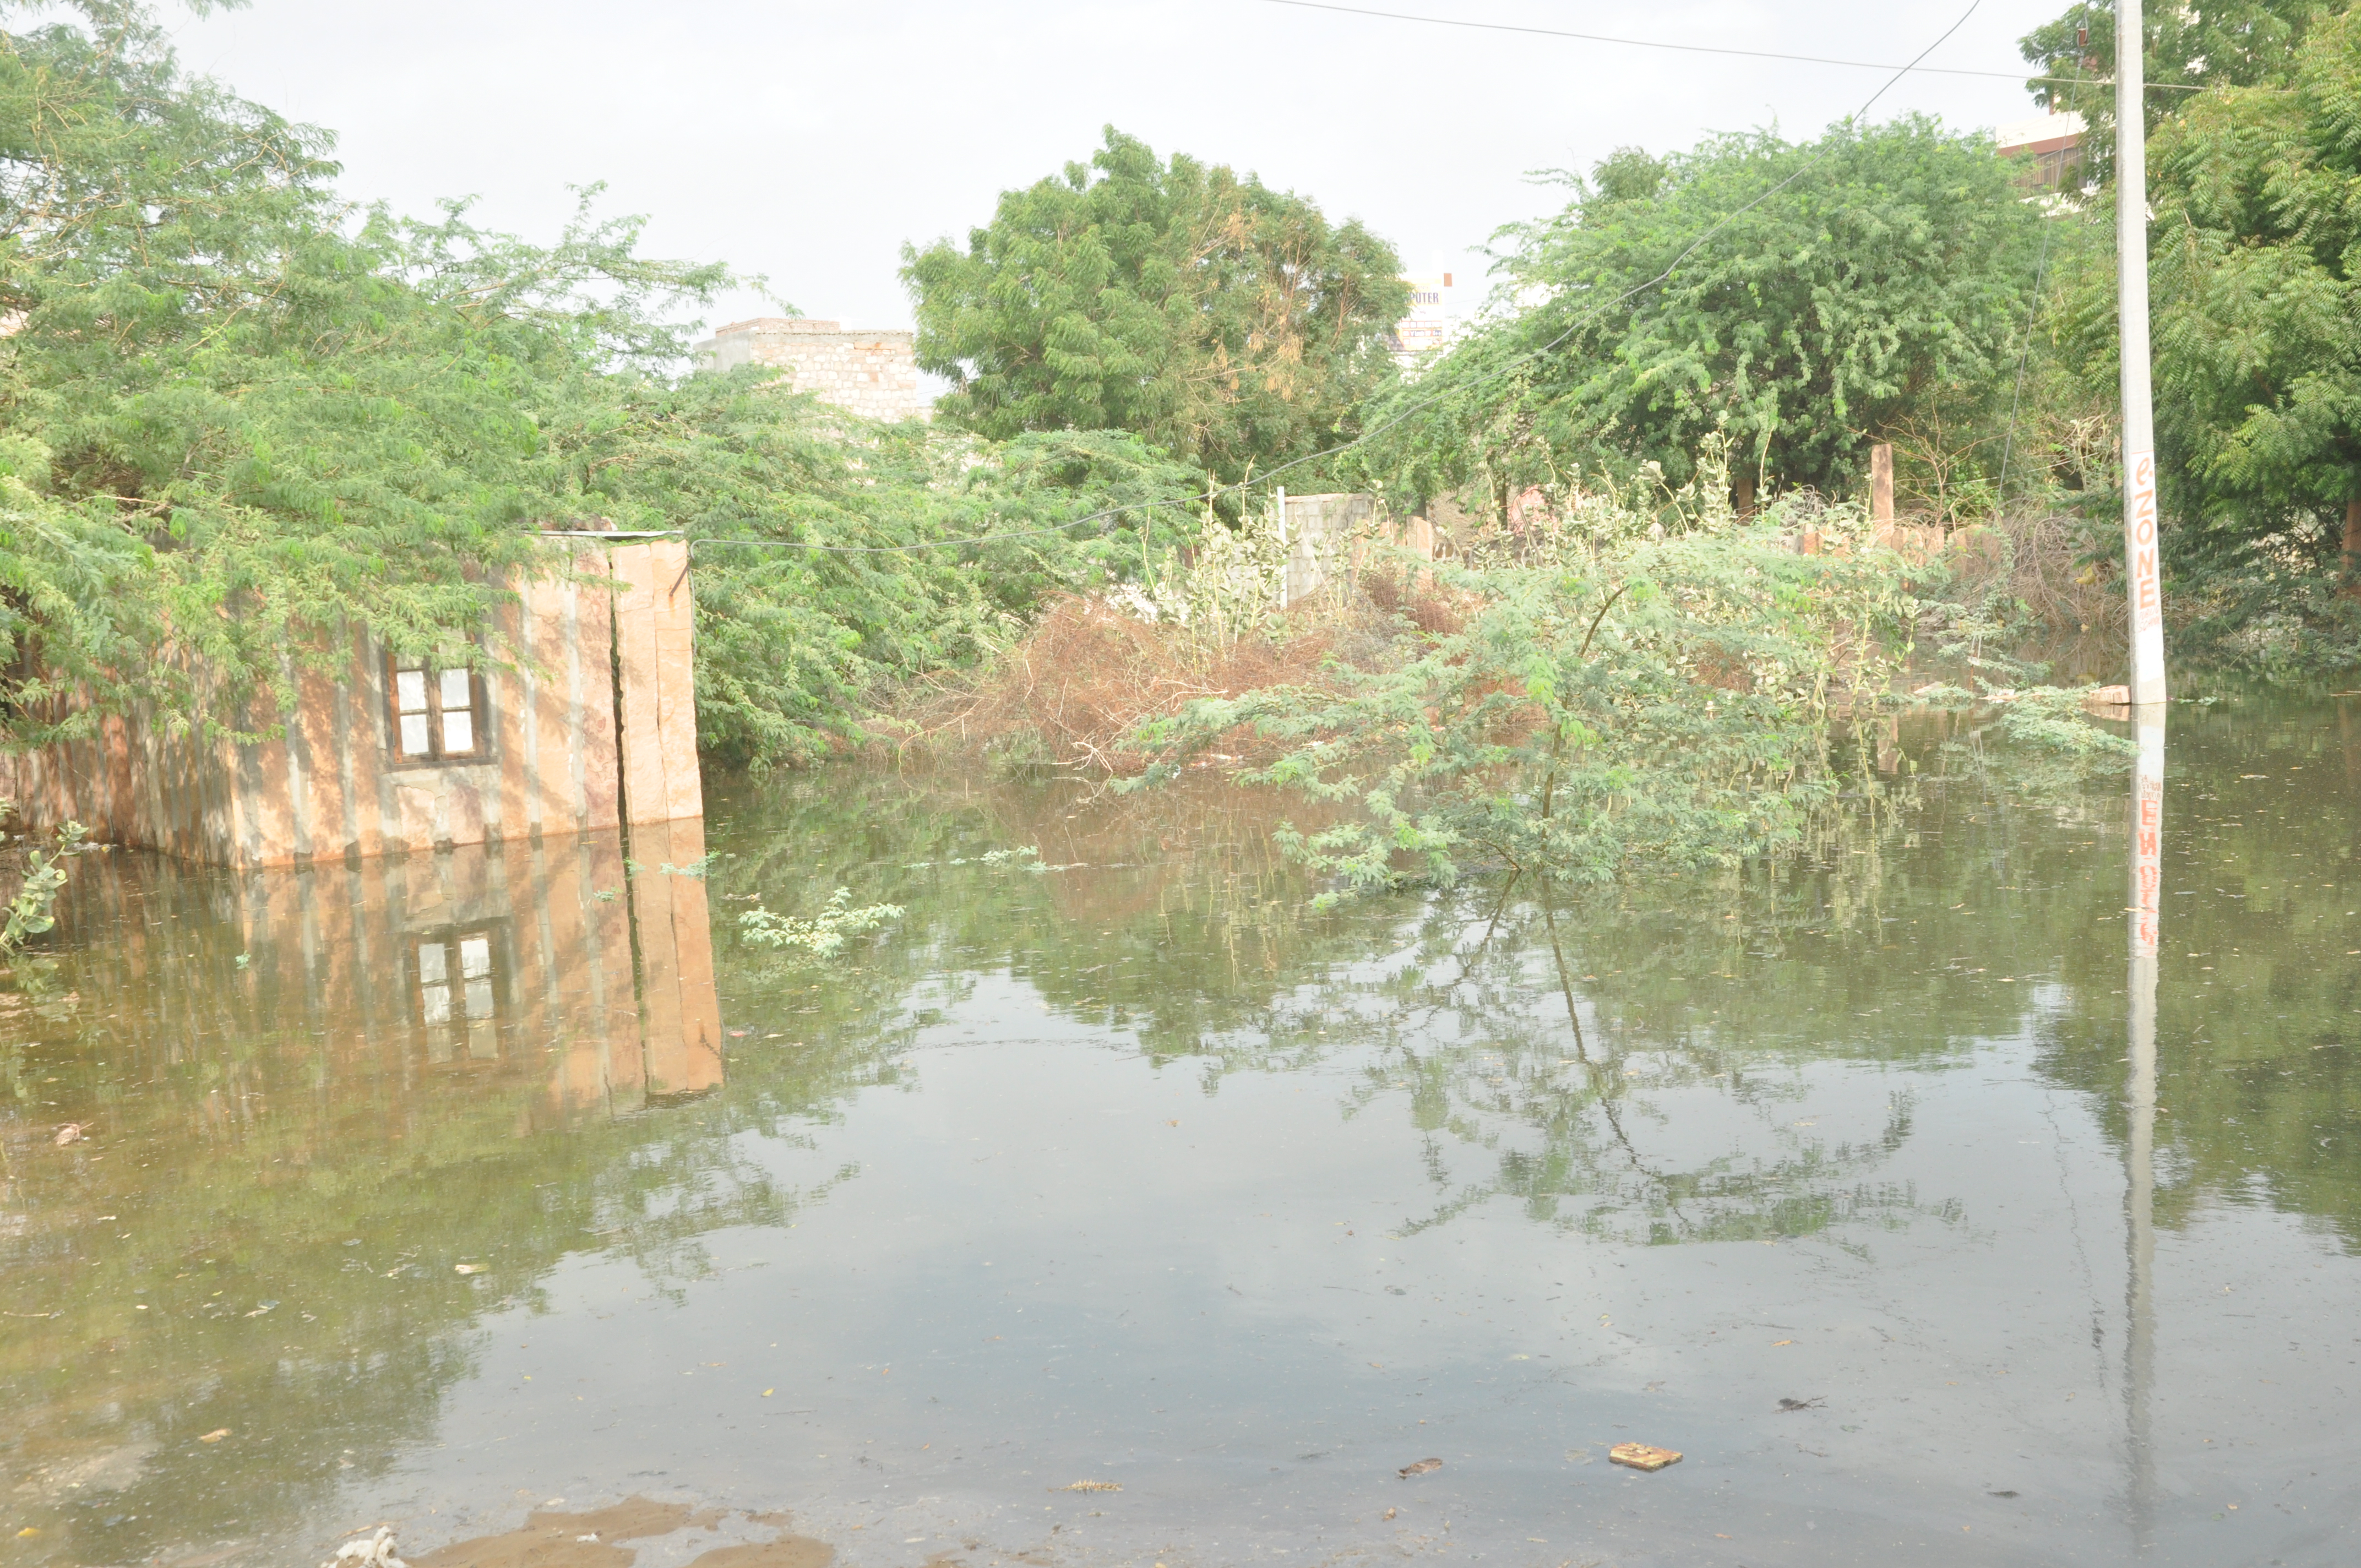 Drain water entered houses, it became difficult for people to get out